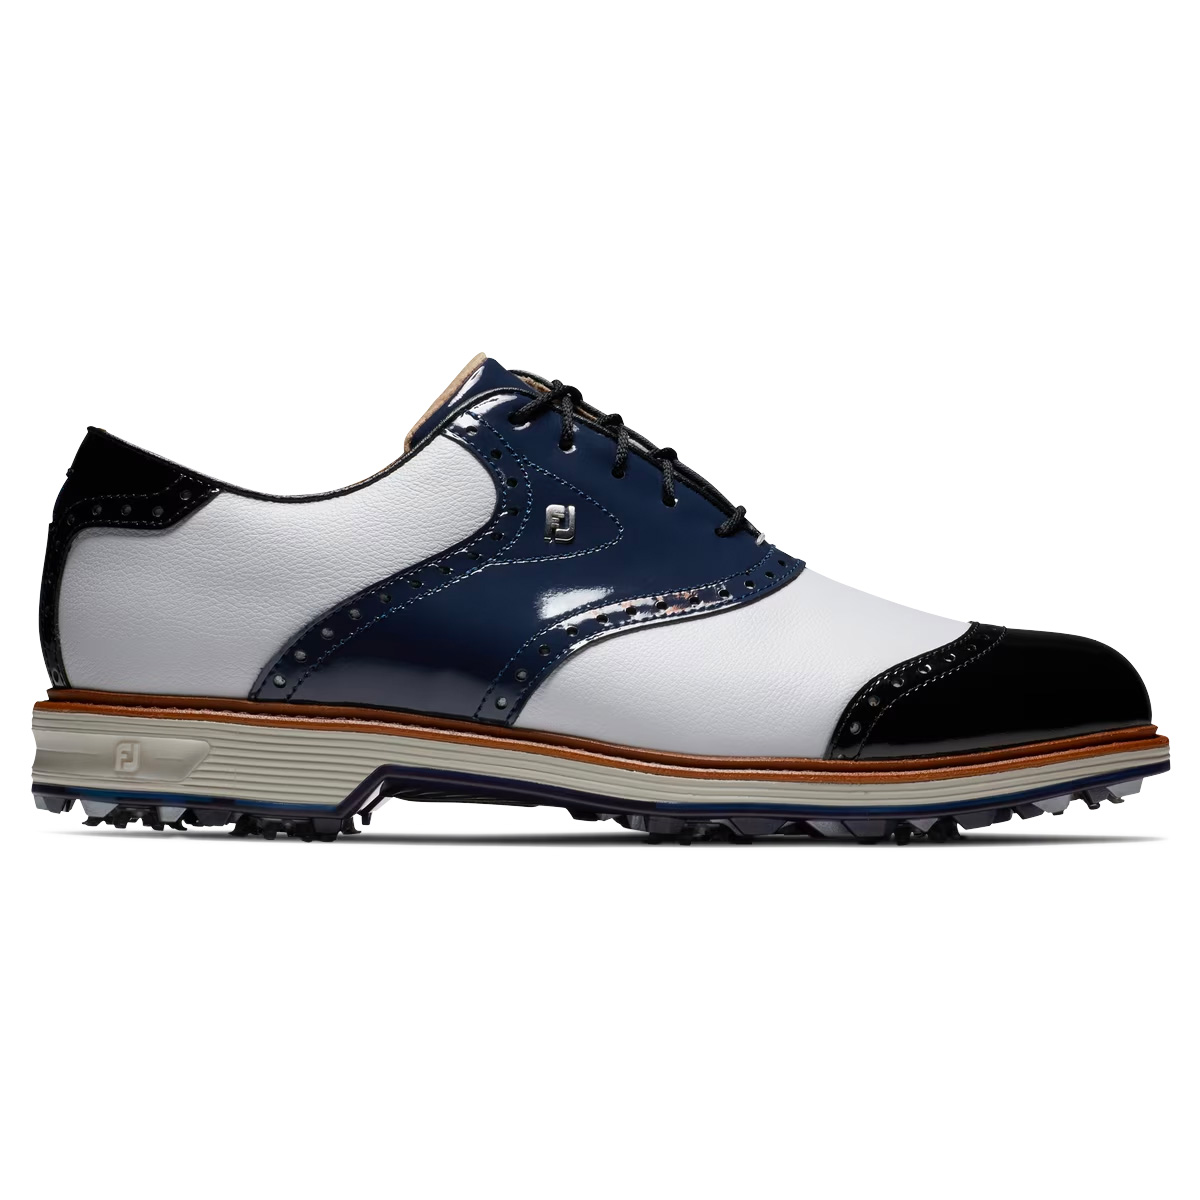 FootJoy Premiere Series Wilcox Mens Spiked Golf Shoes  - White/Navy/Black